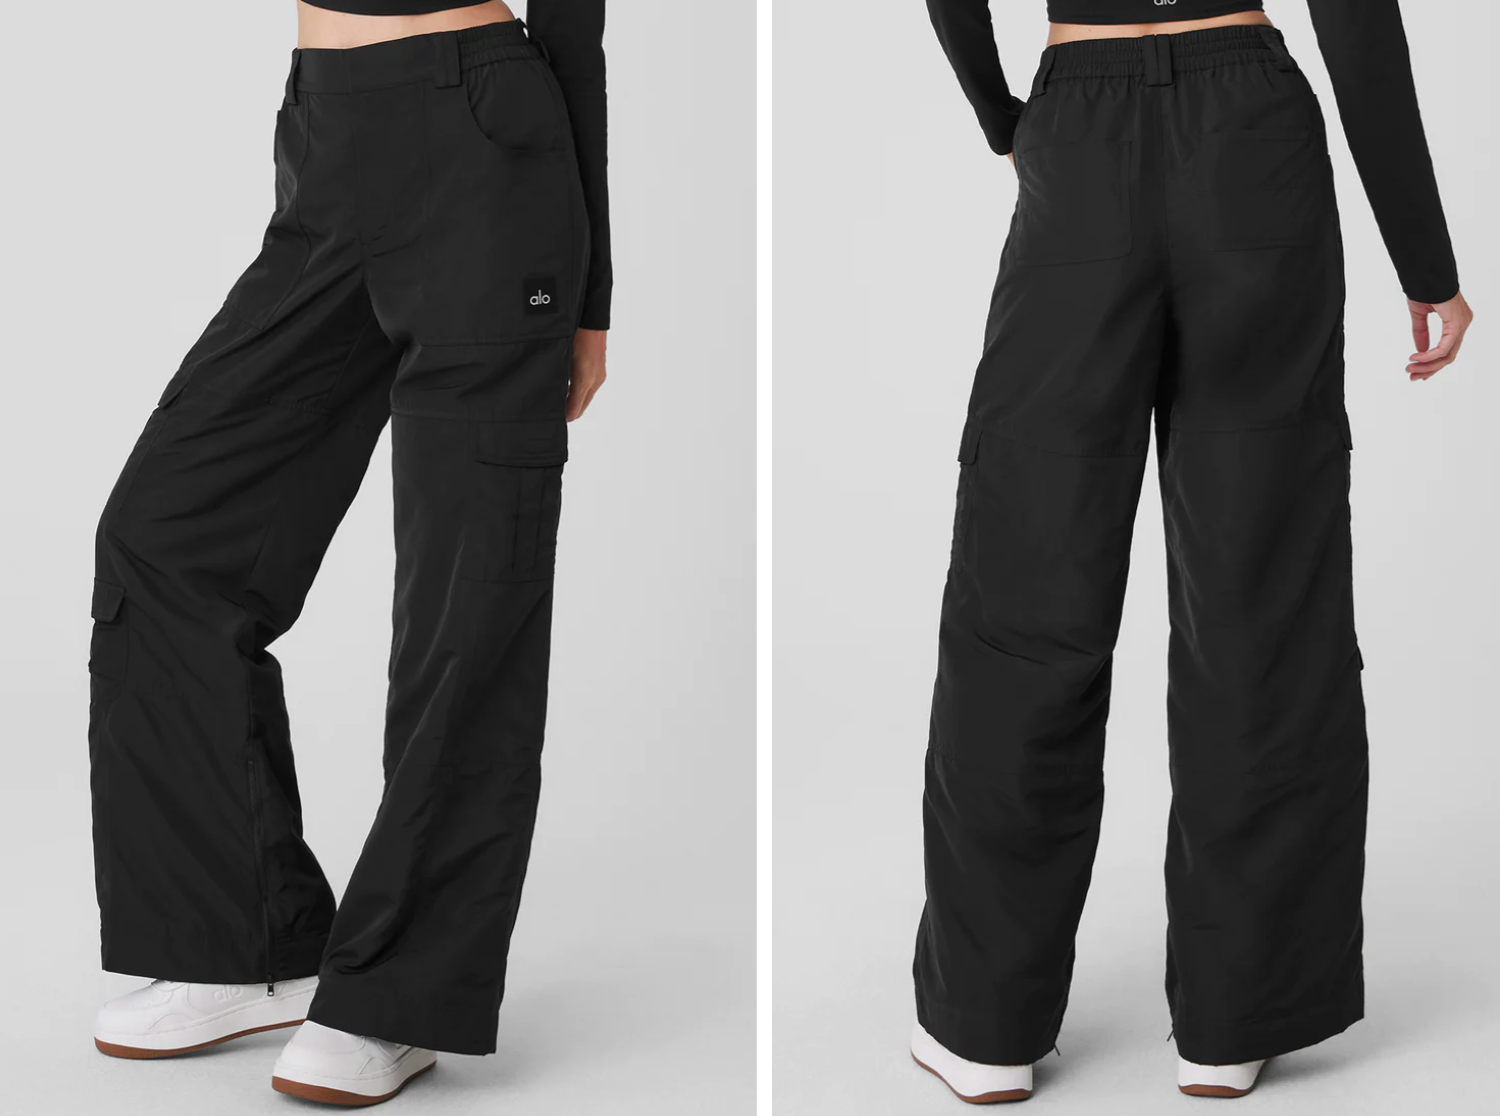 Women's High Experience Practical Durable Snow Pants